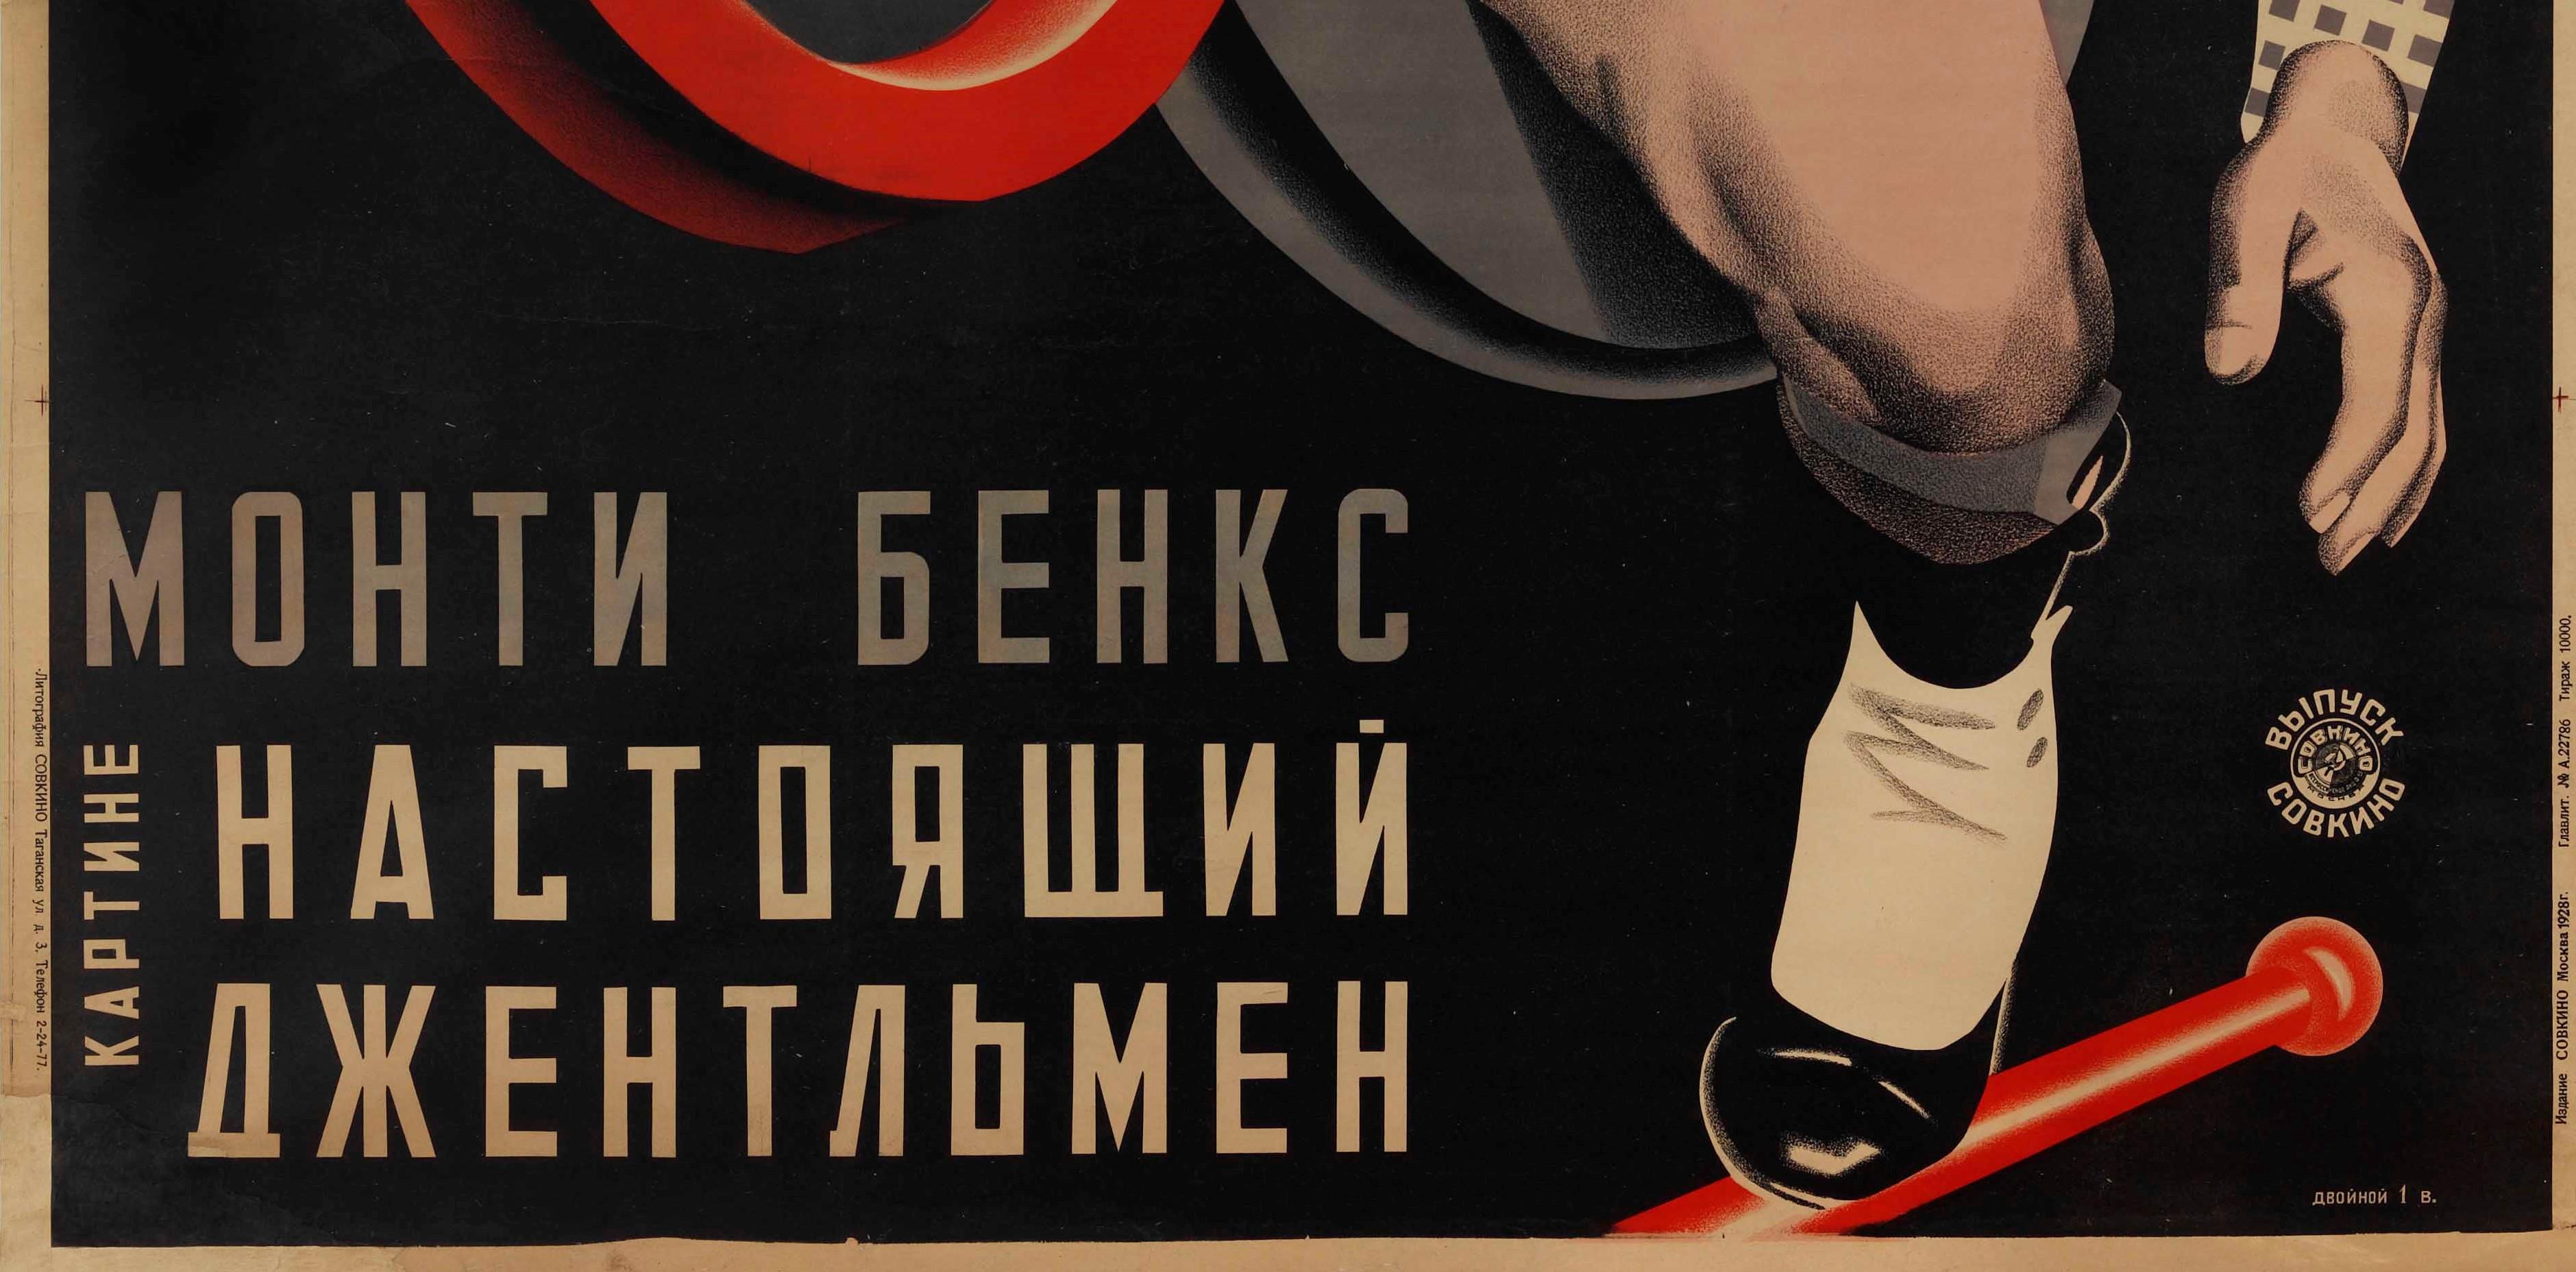 Rare two sheet original vintage movie poster designed by the Stenberg Brothers (Vladimir 1899-1982; Georgii 1900-1933) for a comedy film A Perfect Gentleman starring Monty Banks. Striking Soviet Constructivist design primarily in shades of black and